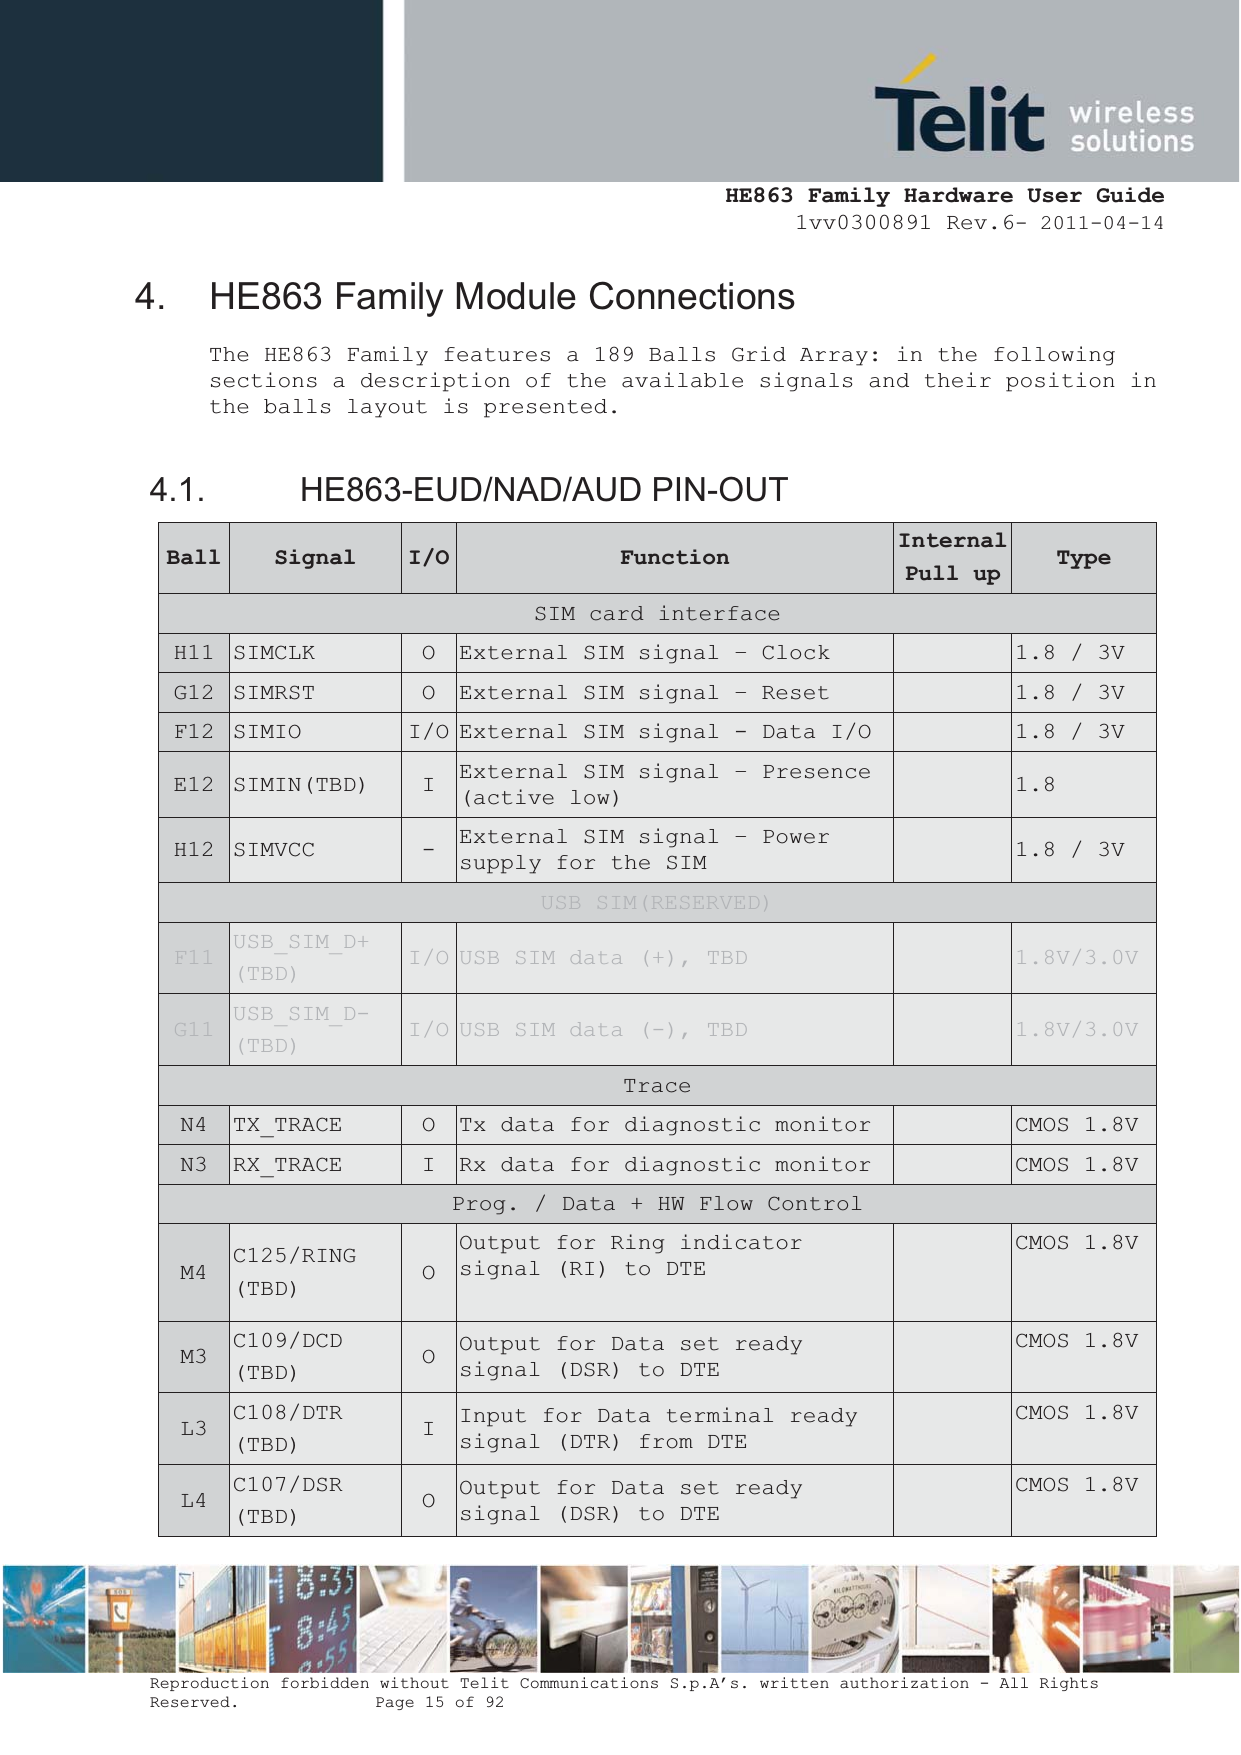  HE863 Family Hardware User Guide 1vv0300891 Rev.6- 2011-04-14    Reproduction forbidden without Telit Communications S.p.A’s. written authorization - All Rights Reserved.    Page 15 of 92  4.  HE863 Family Module Connections The HE863 Family features a 189 Balls Grid Array: in the following sections a description of the available signals and their position in the balls layout is presented.  4.1. HE863-EUD/NAD/AUD PIN-OUT Ball Signal I/O Function InternalPull up  TypeSIM card interface H11  SIMCLK  O  External SIM signal – Clock   1.8 / 3V G12  SIMRST  O  External SIM signal – Reset   1.8 / 3V F12  SIMIO  I/O External SIM signal - Data I/O   1.8 / 3V E12  SIMIN(TBD)  I  External SIM signal – Presence (active low)   1.8 H12  SIMVCC  -  External SIM signal – Power supply for the SIM   1.8 / 3V USB SIM(RESERVED) F11  USB_SIM_D+ (TBD)  I/O USB SIM data (+), TBD   1.8V/3.0VG11  USB_SIM_D- (TBD)  I/O USB SIM data (-), TBD   1.8V/3.0VTrace N4  TX_TRACE  O  Tx data for diagnostic monitor   CMOS 1.8VN3  RX_TRACE  I  Rx data for diagnostic monitor   CMOS 1.8VProg. / Data + HW Flow Control M4  C125/RING (TBD)  O Output for Ring indicator signal (RI) to DTE   CMOS 1.8VM3  C109/DCD (TBD)  O  Output for Data set ready signal (DSR) to DTE   CMOS 1.8VL3  C108/DTR (TBD)  I  Input for Data terminal ready signal (DTR) from DTE   CMOS 1.8VL4  C107/DSR (TBD)  O  Output for Data set ready signal (DSR) to DTE   CMOS 1.8V